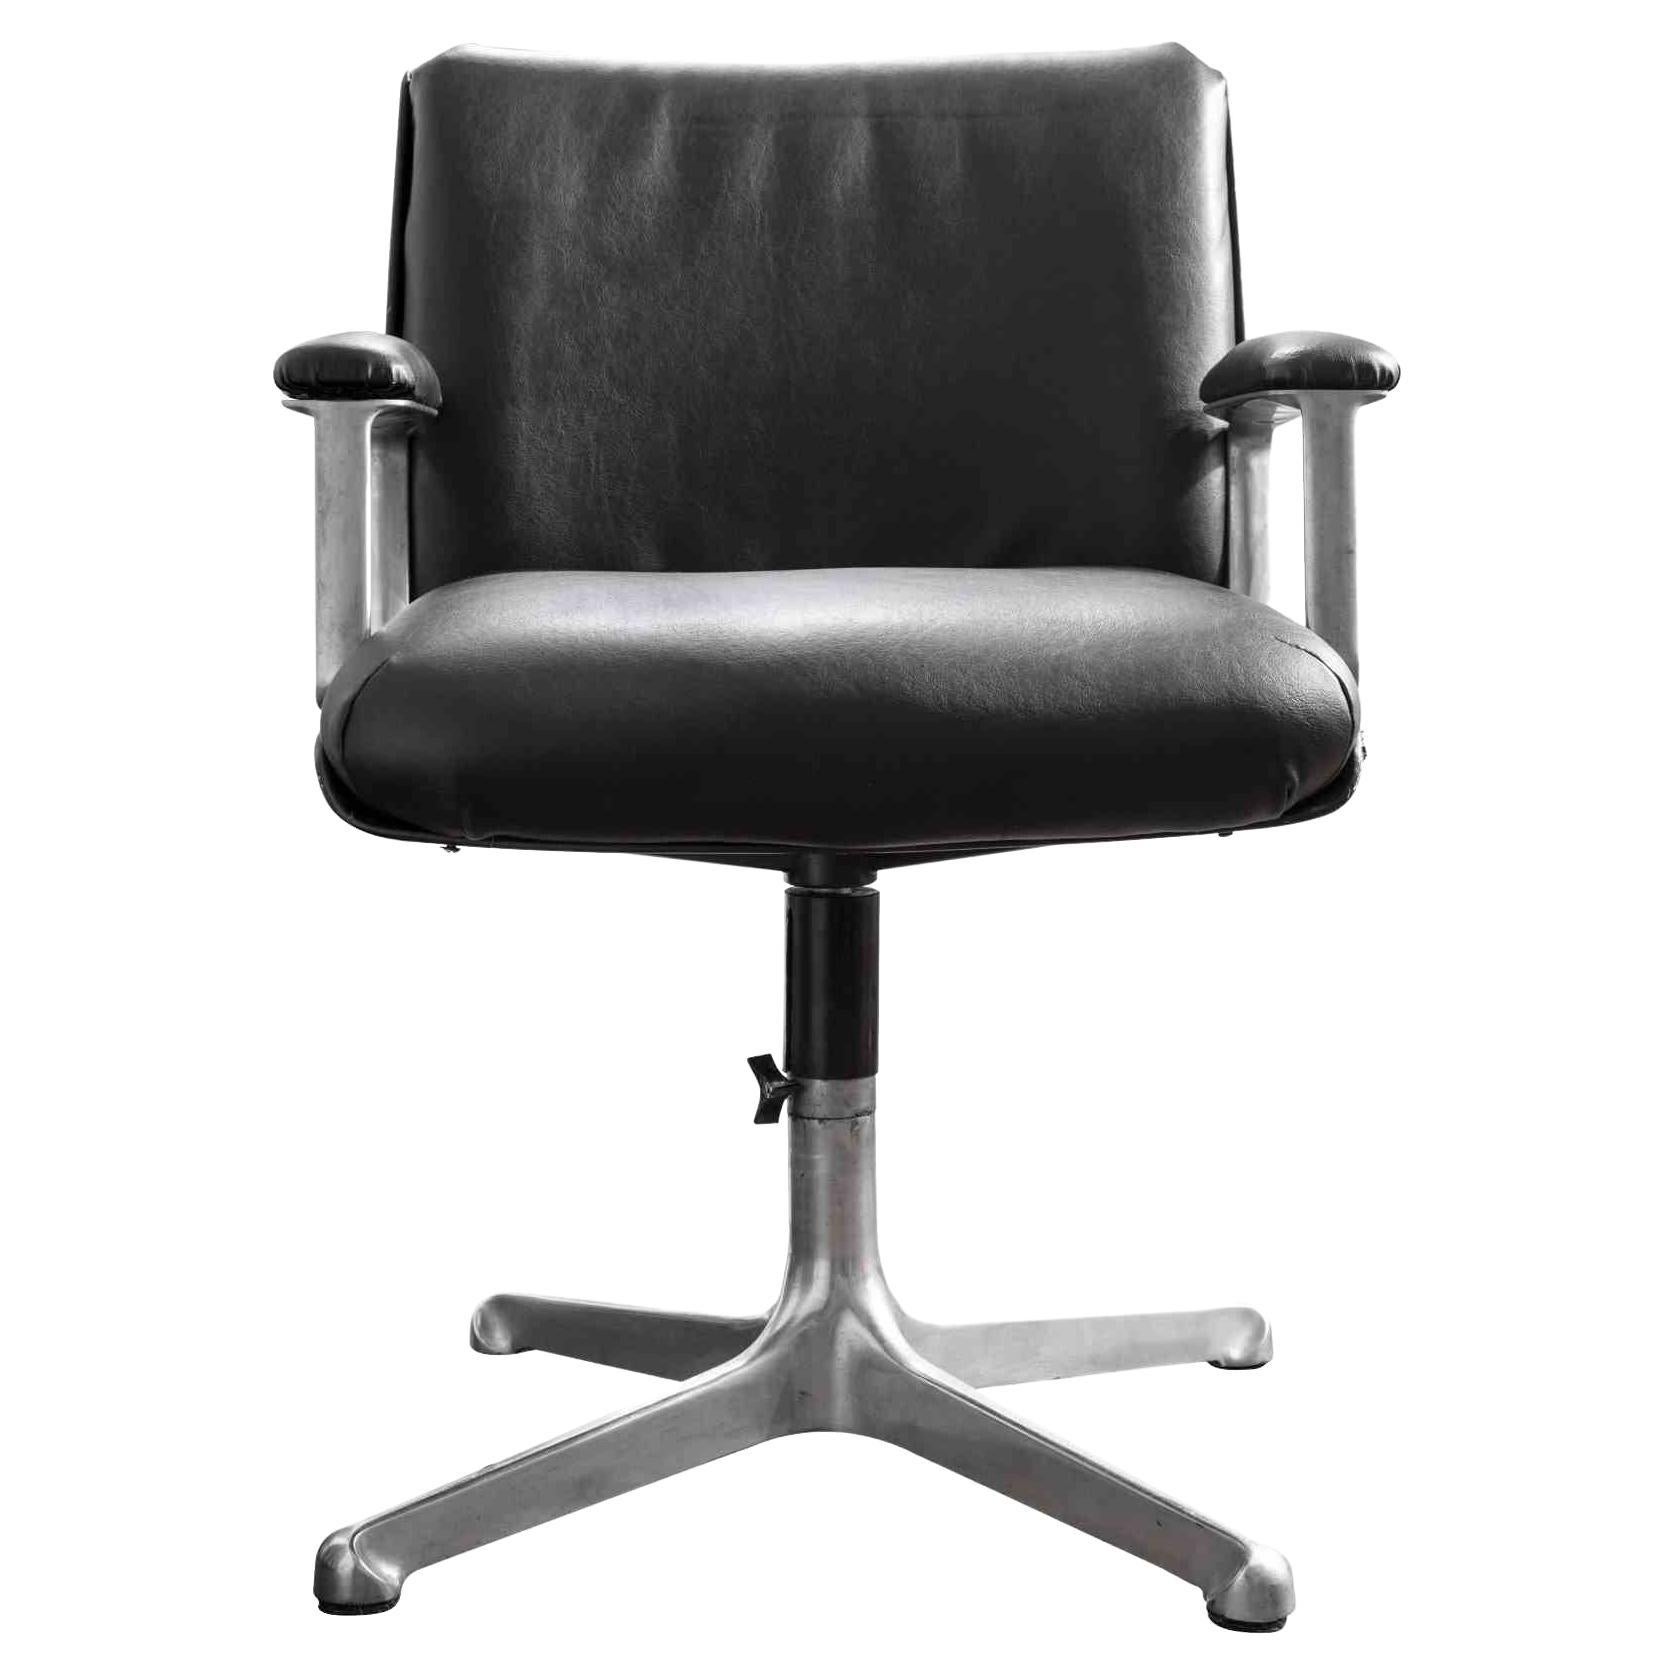 Tecno armchair is an original design furniture realized in the 1970s.

Swivel armchair in black leather.

Made in Italy.

Total dimensions: 90 x 50 x 50 cm. The weight is indicative. 

Mint conditions.